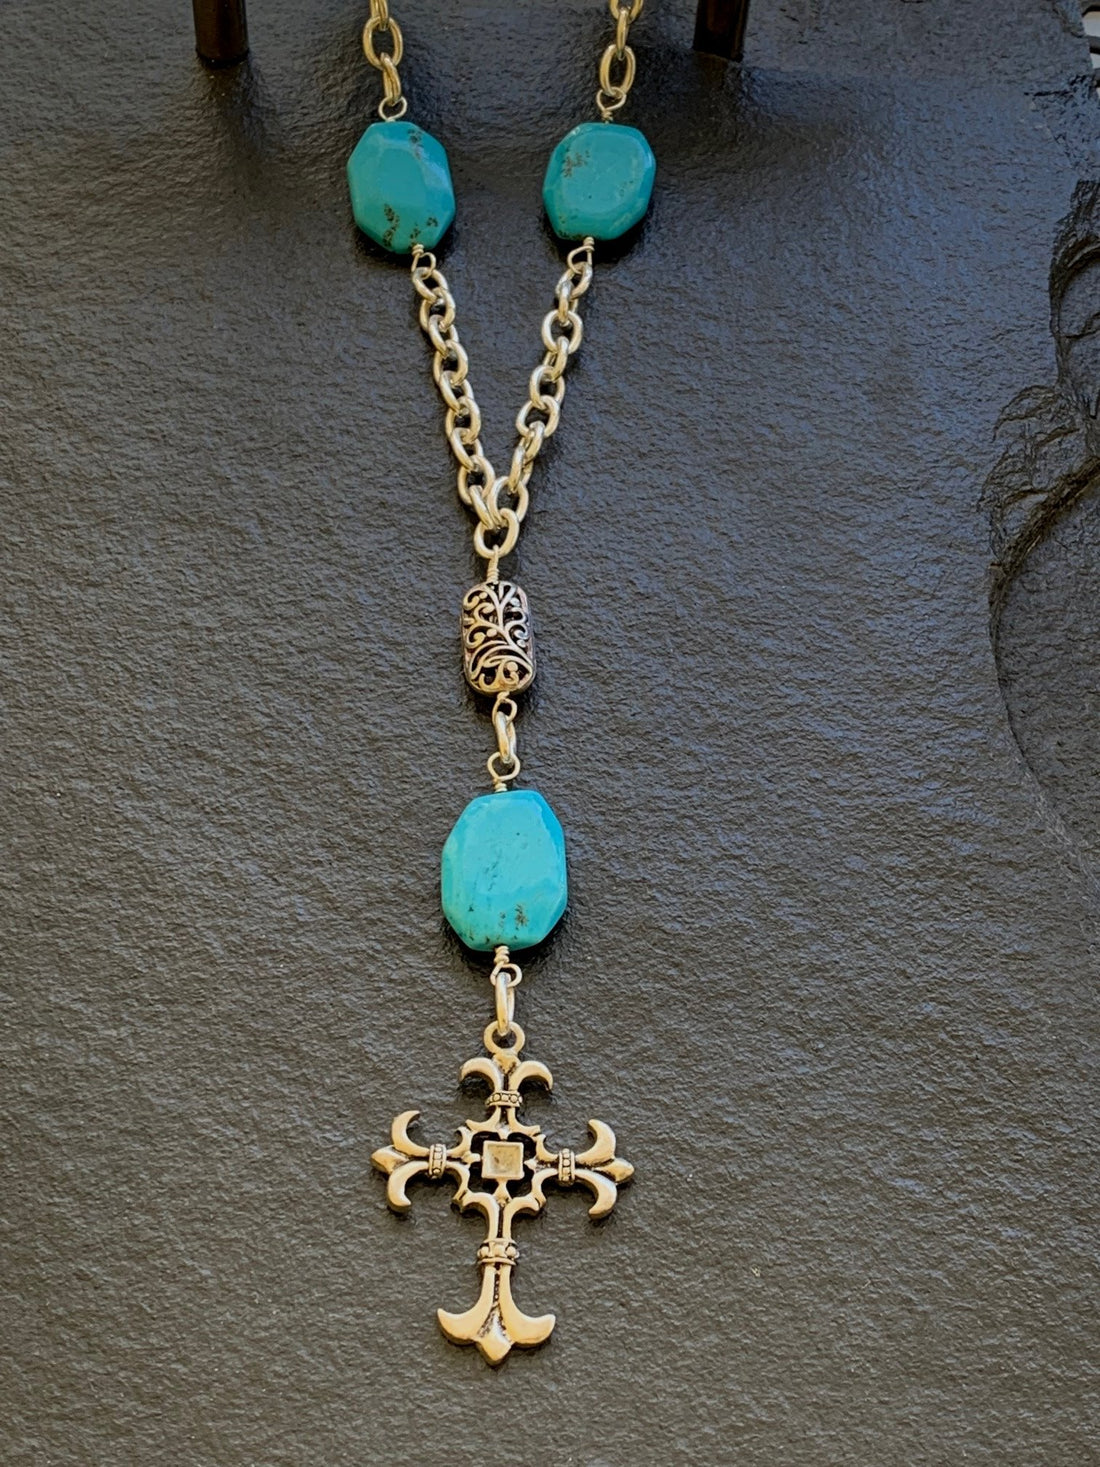 A necklace made of Turquoise Rectangles on silver chain with silver cross